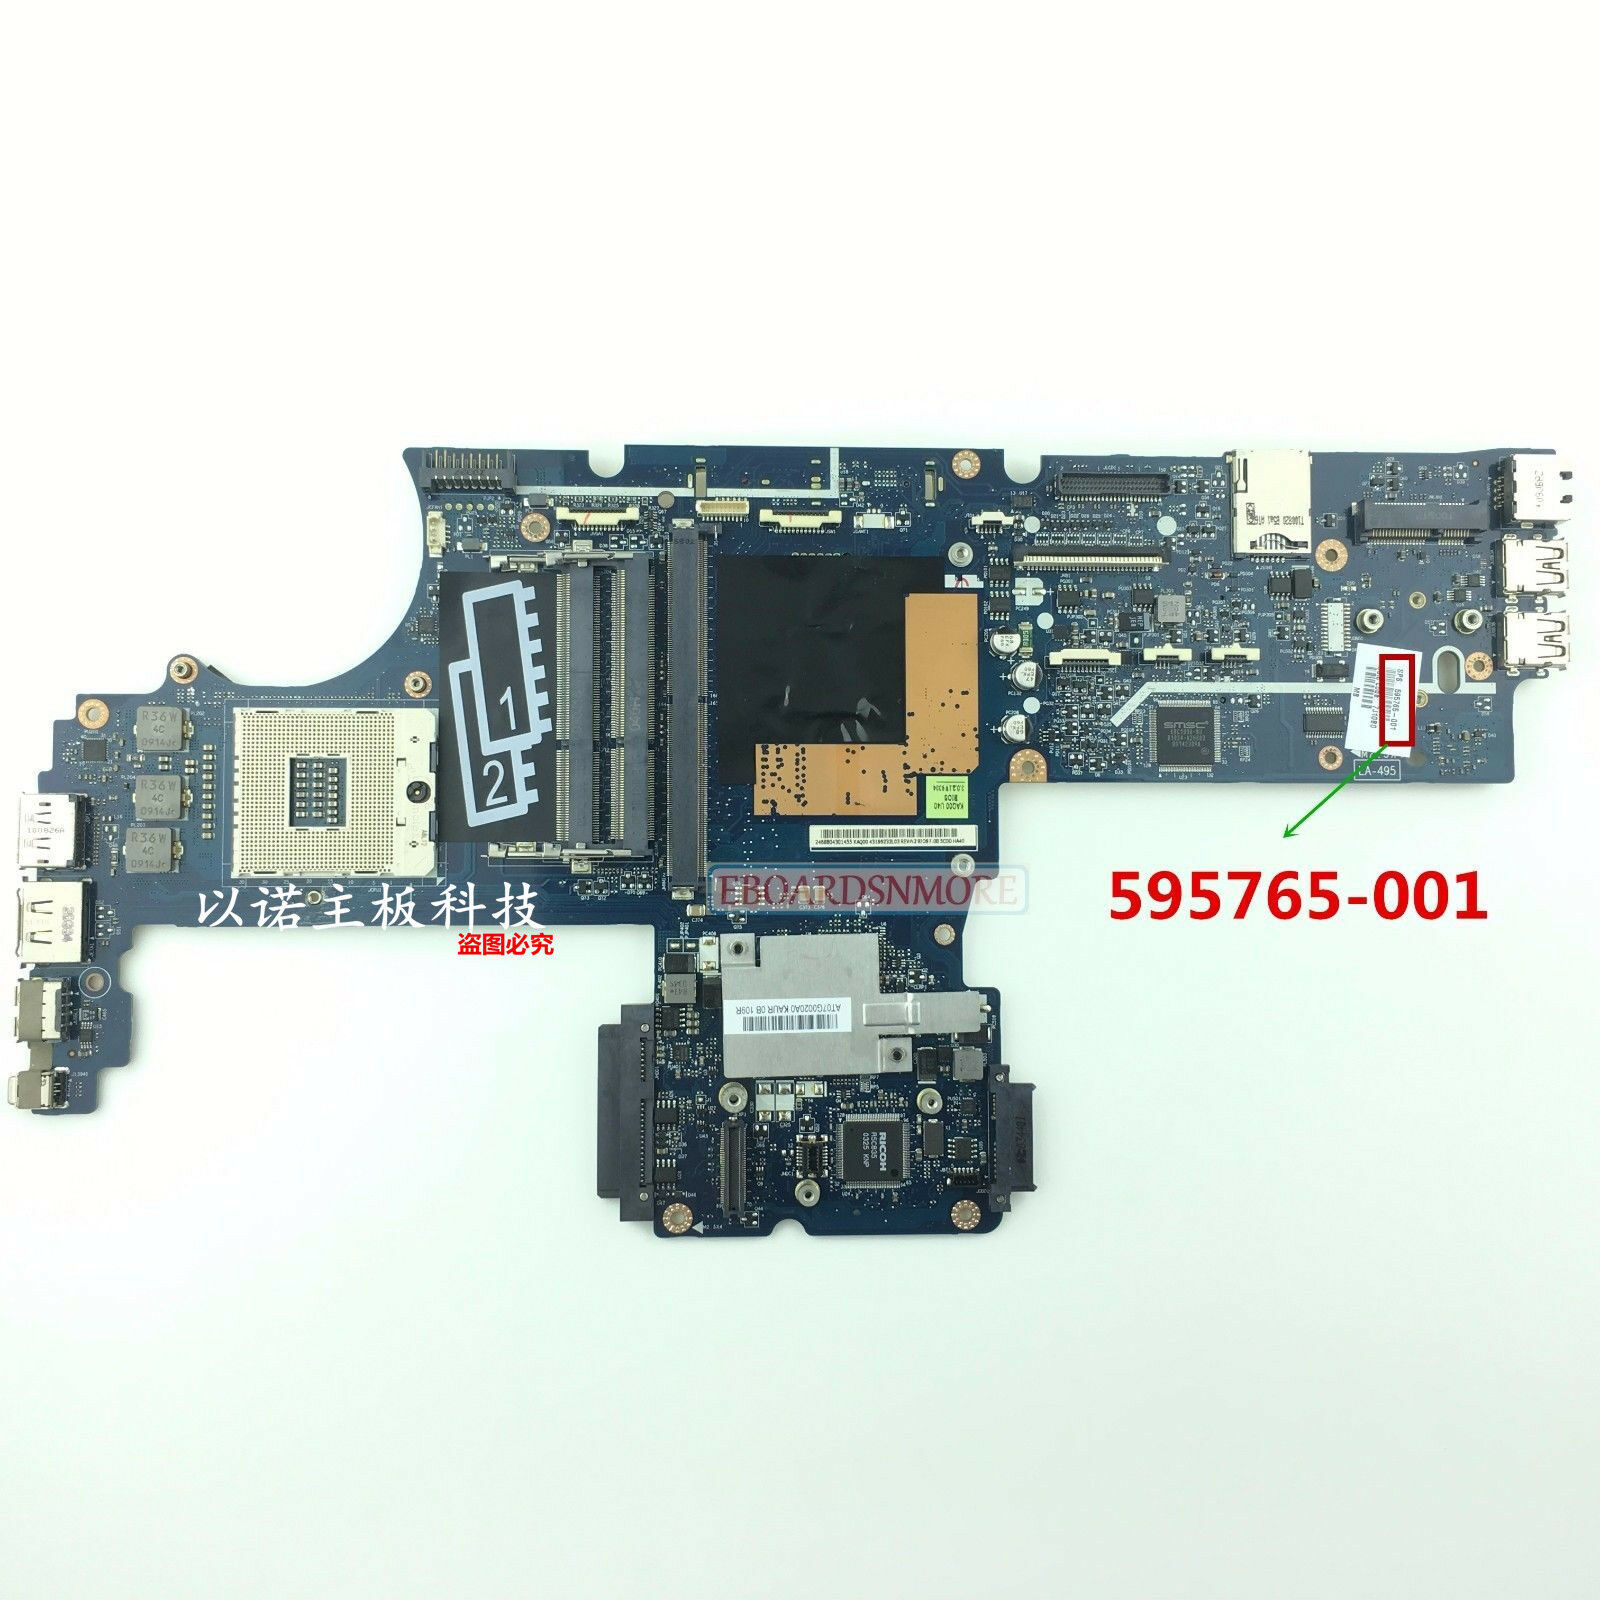 595765-001 Dedicated Graphics Motherboard for HP ELITEBOOK 8540P 8540W Laptop A Brand: HP Input/Output Por